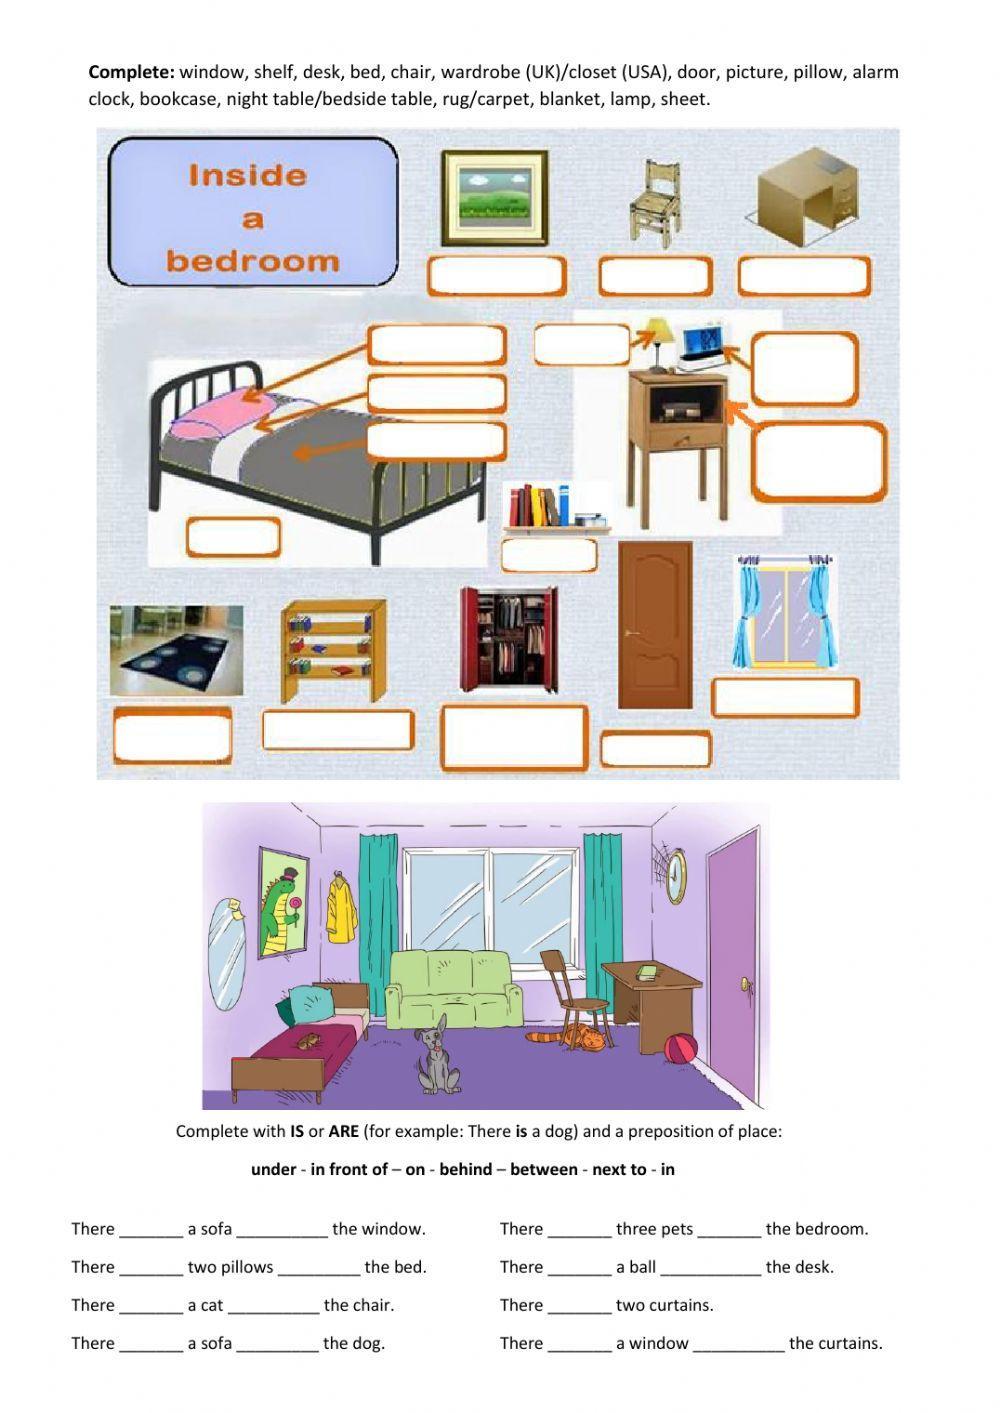 Bedroom furniture - Prepositions of place